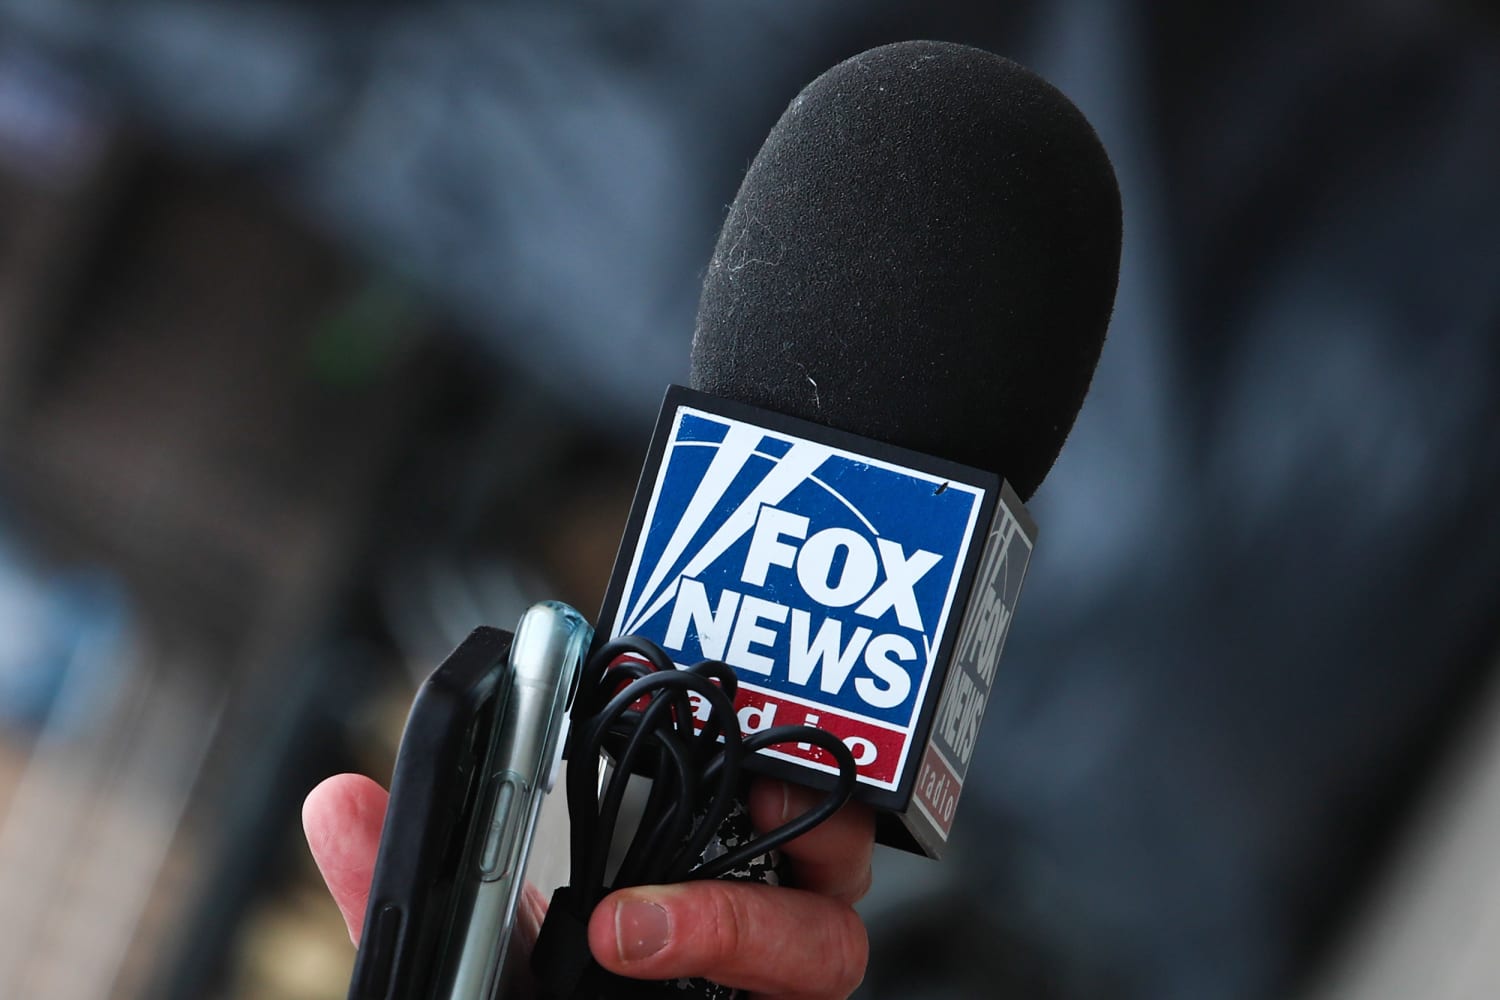 Fox News blacked out too much in court documents, say Dominion and media outlets